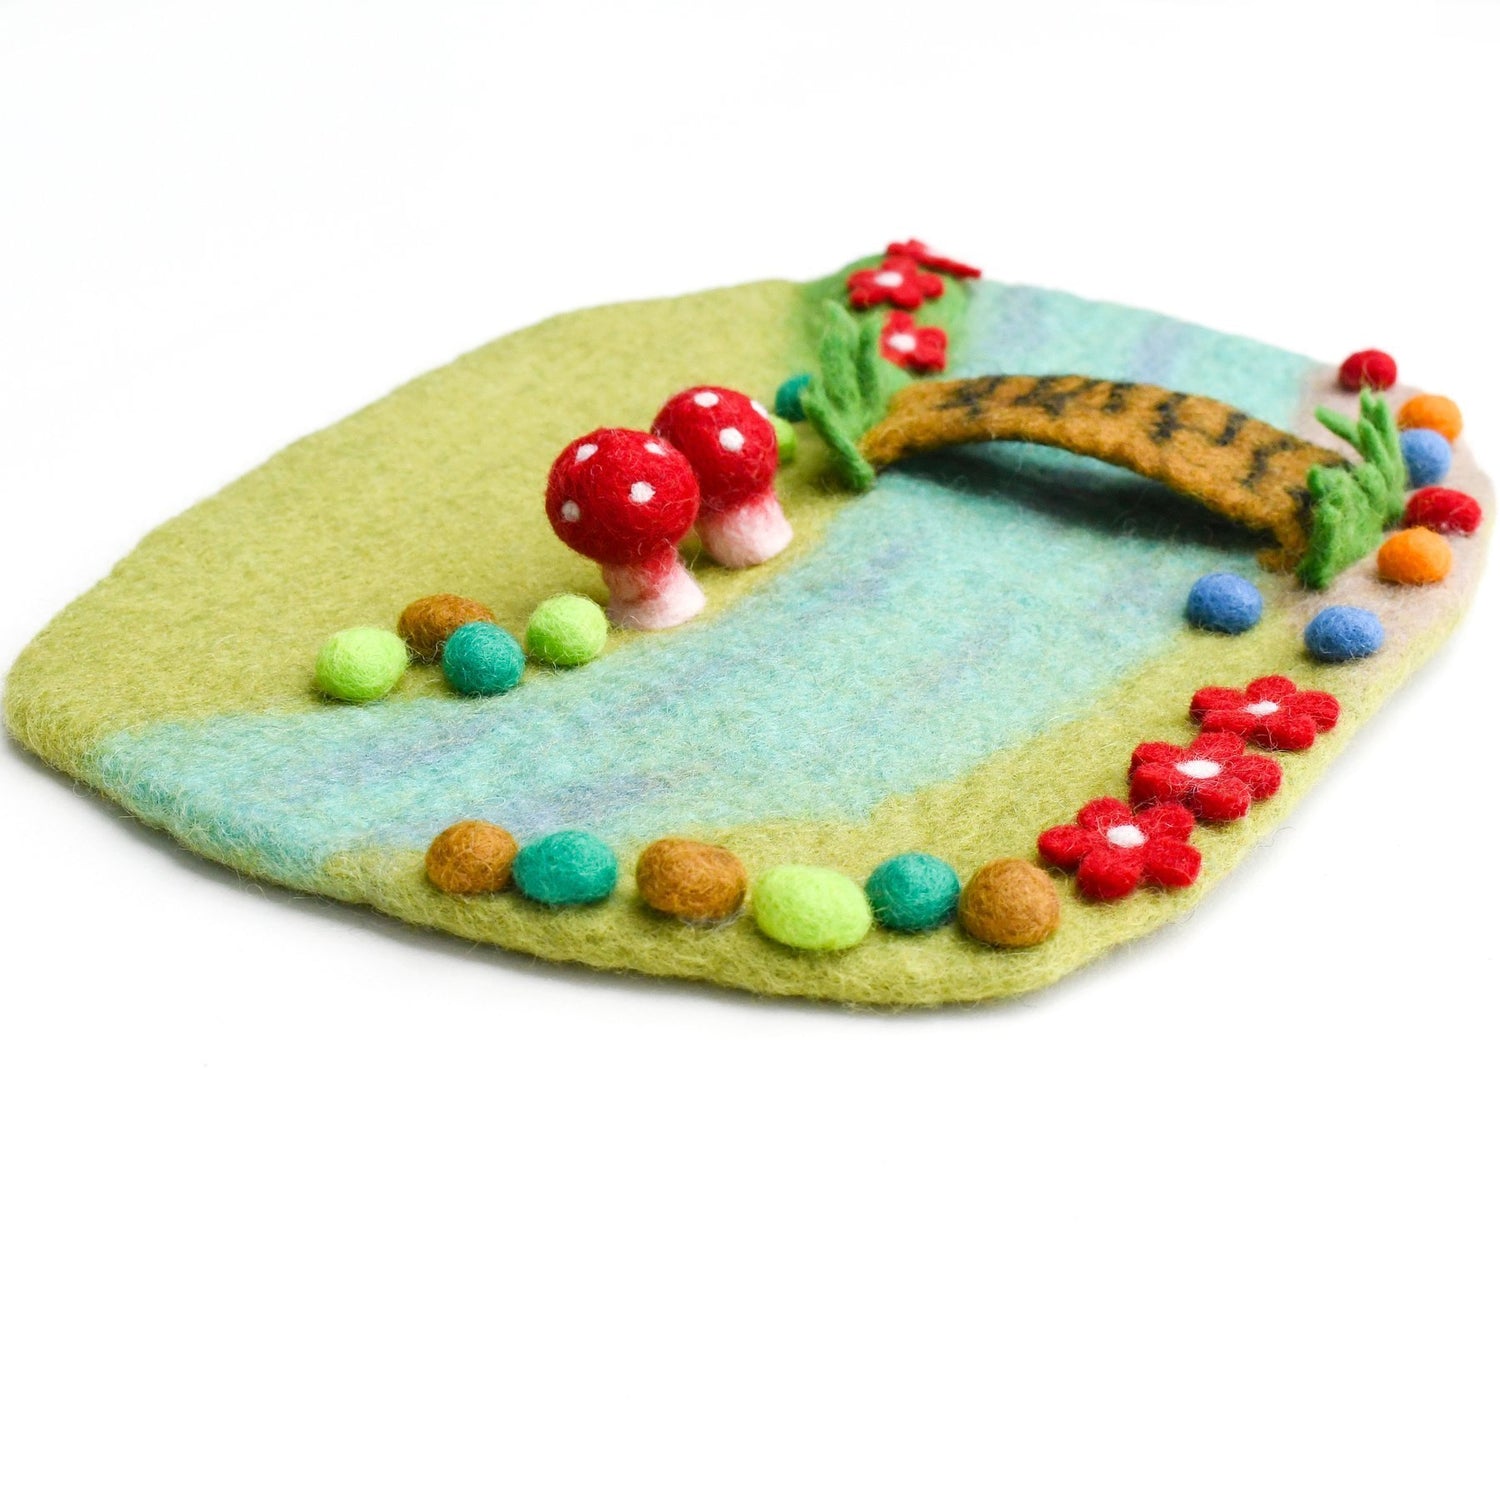 FAIRY RIVER AND BRIDGE PLAY MAT PLAYSCAPE by TARA TREASURES - The Playful Collective